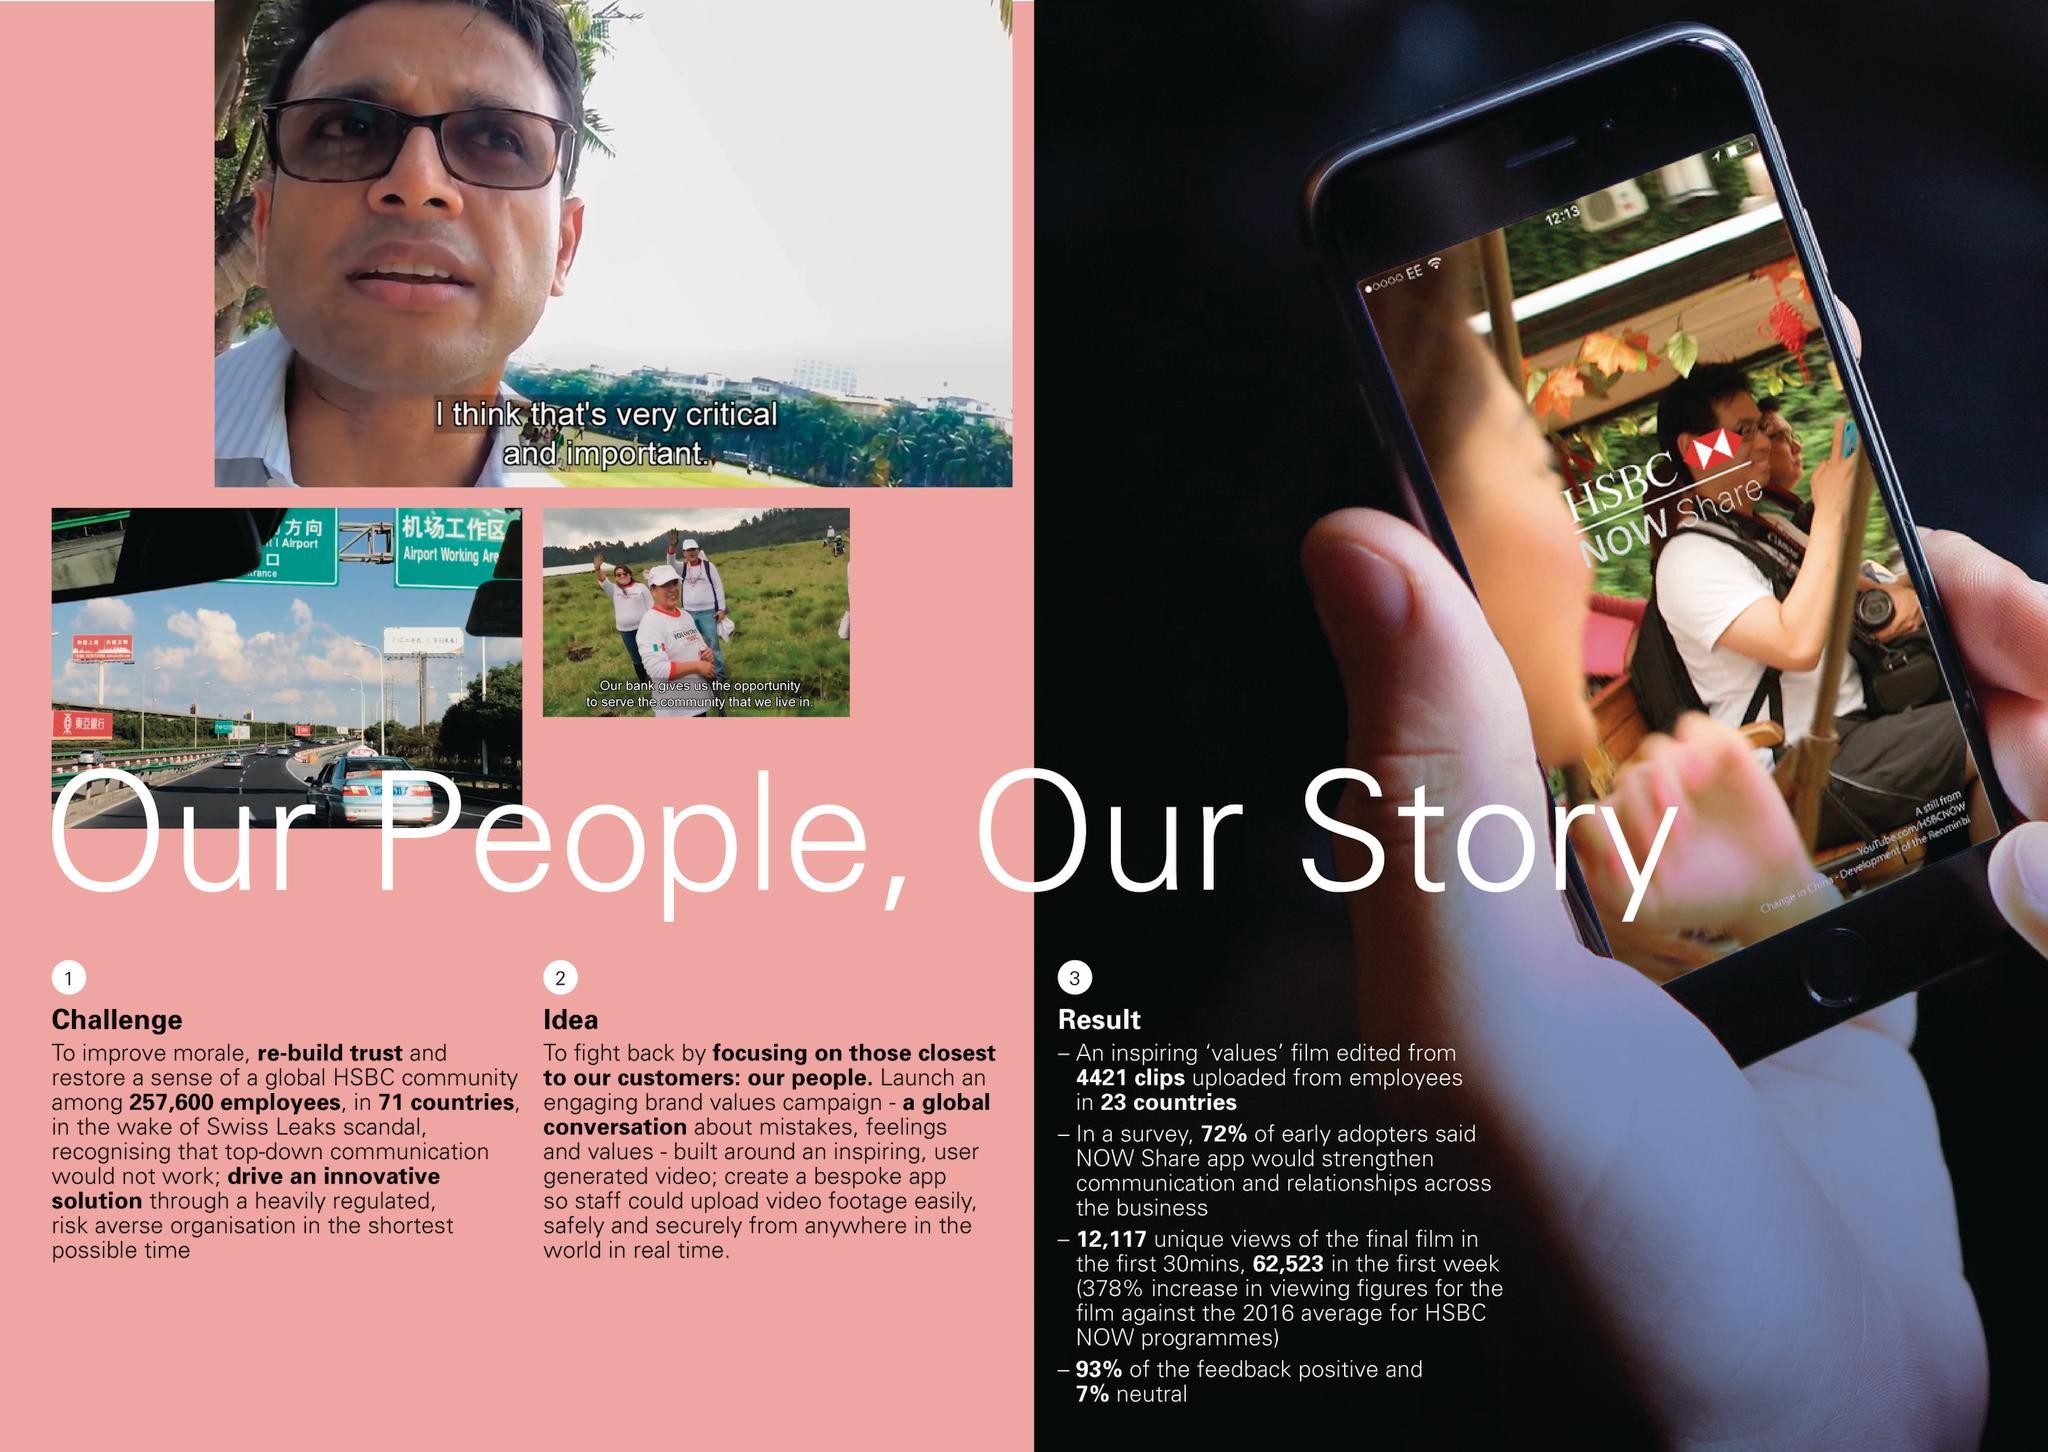 Our People, Our Story - HSBC NOW Share